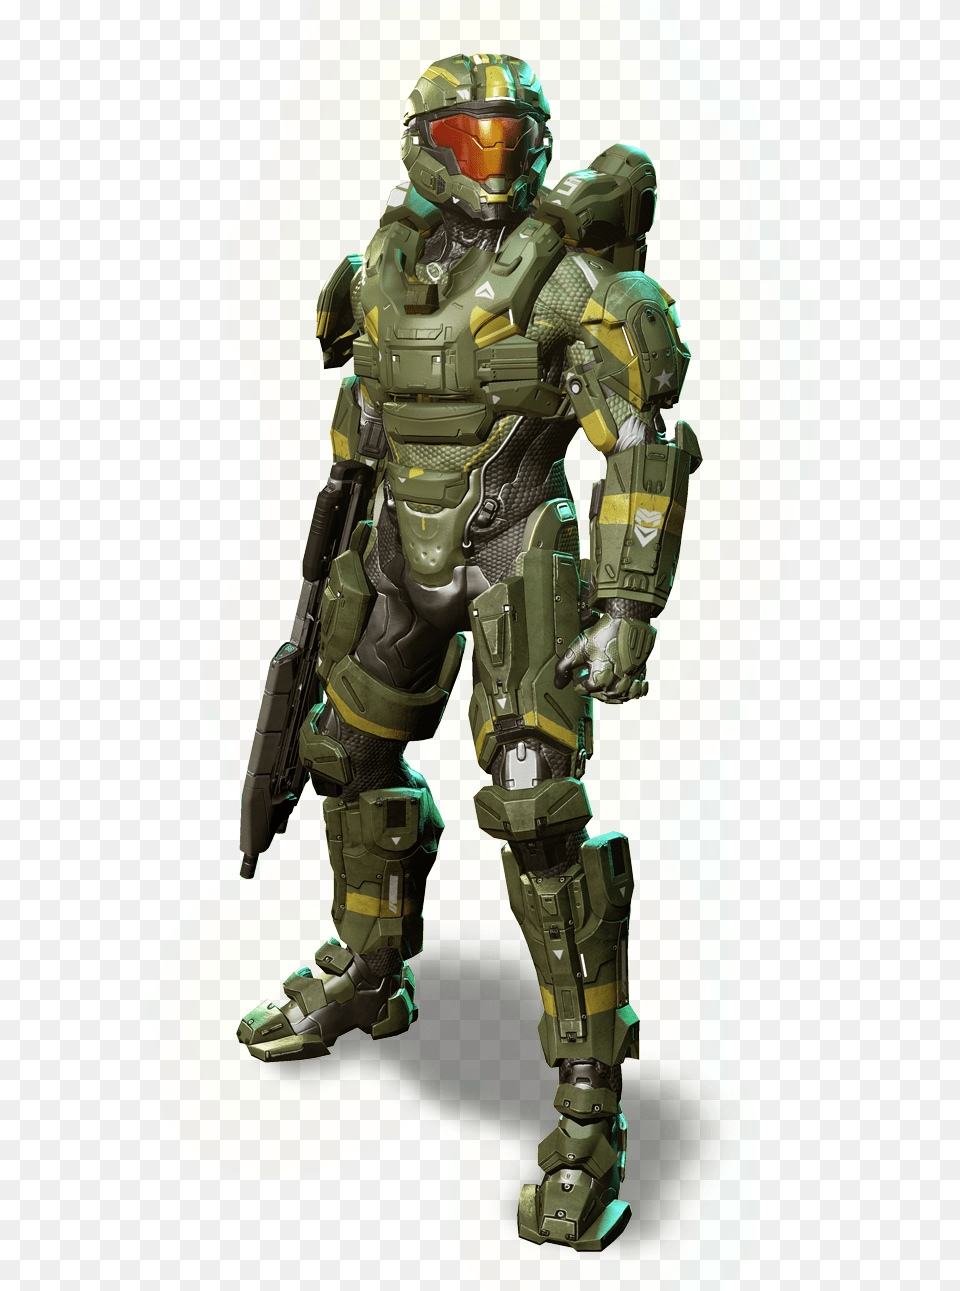 Man39 Suit Commissioned By Us Military Halo 4 Air Assault Armor, Helmet, Adult, Male, Man Png